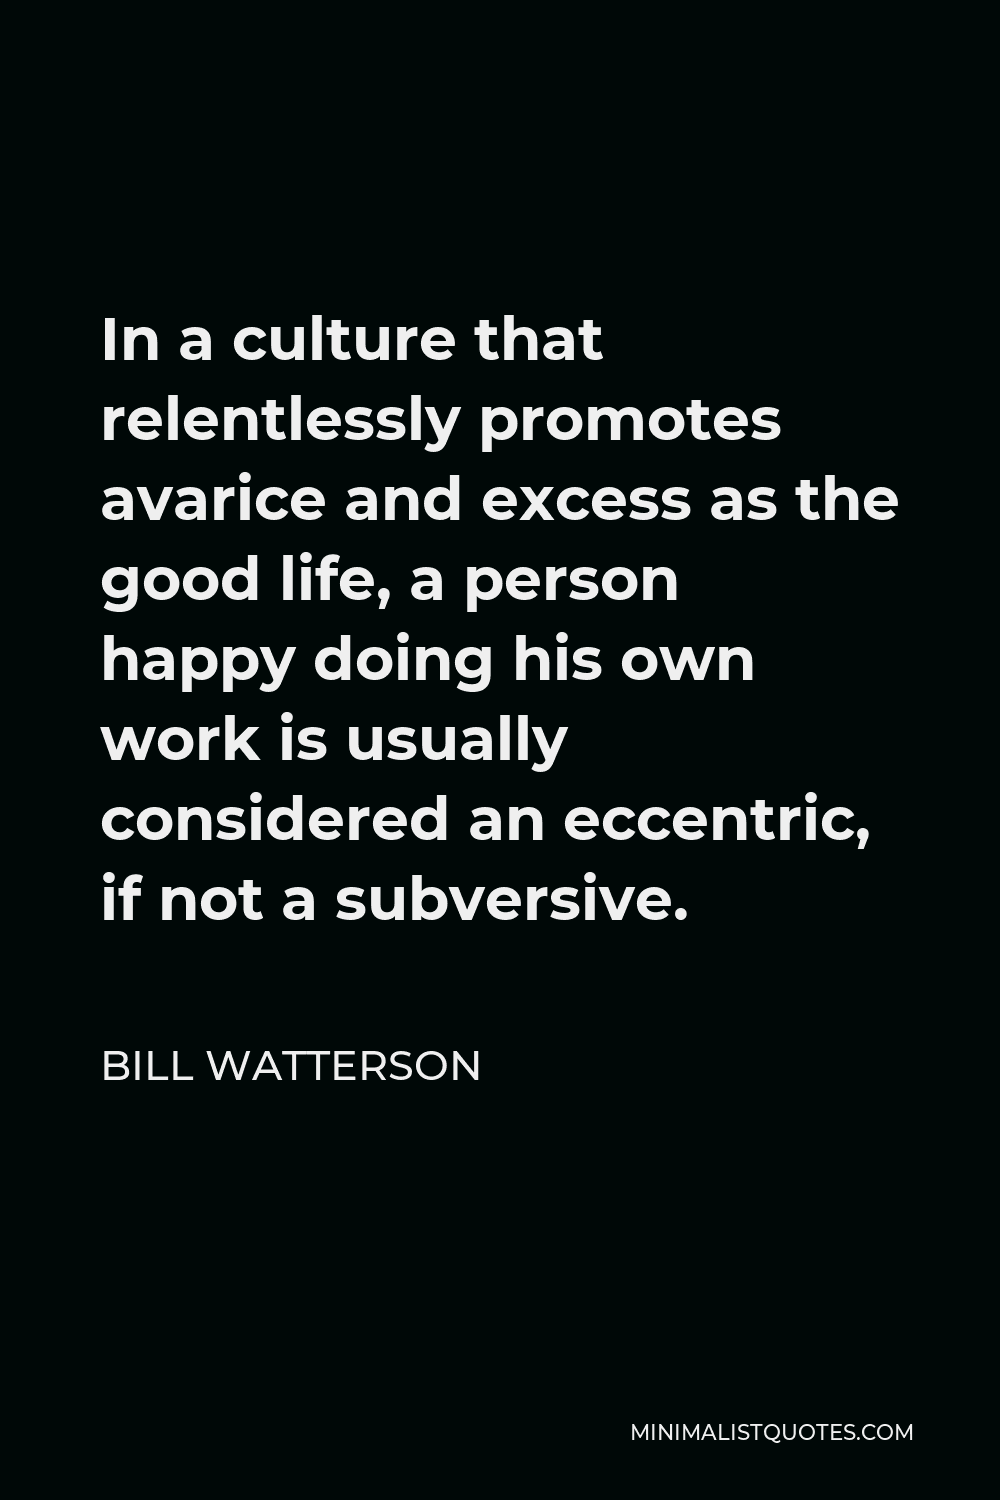 Bill Watterson Quote - In a culture that relentlessly promotes avarice and excess as the good life, a person happy doing his own work is usually considered an eccentric, if not a subversive.